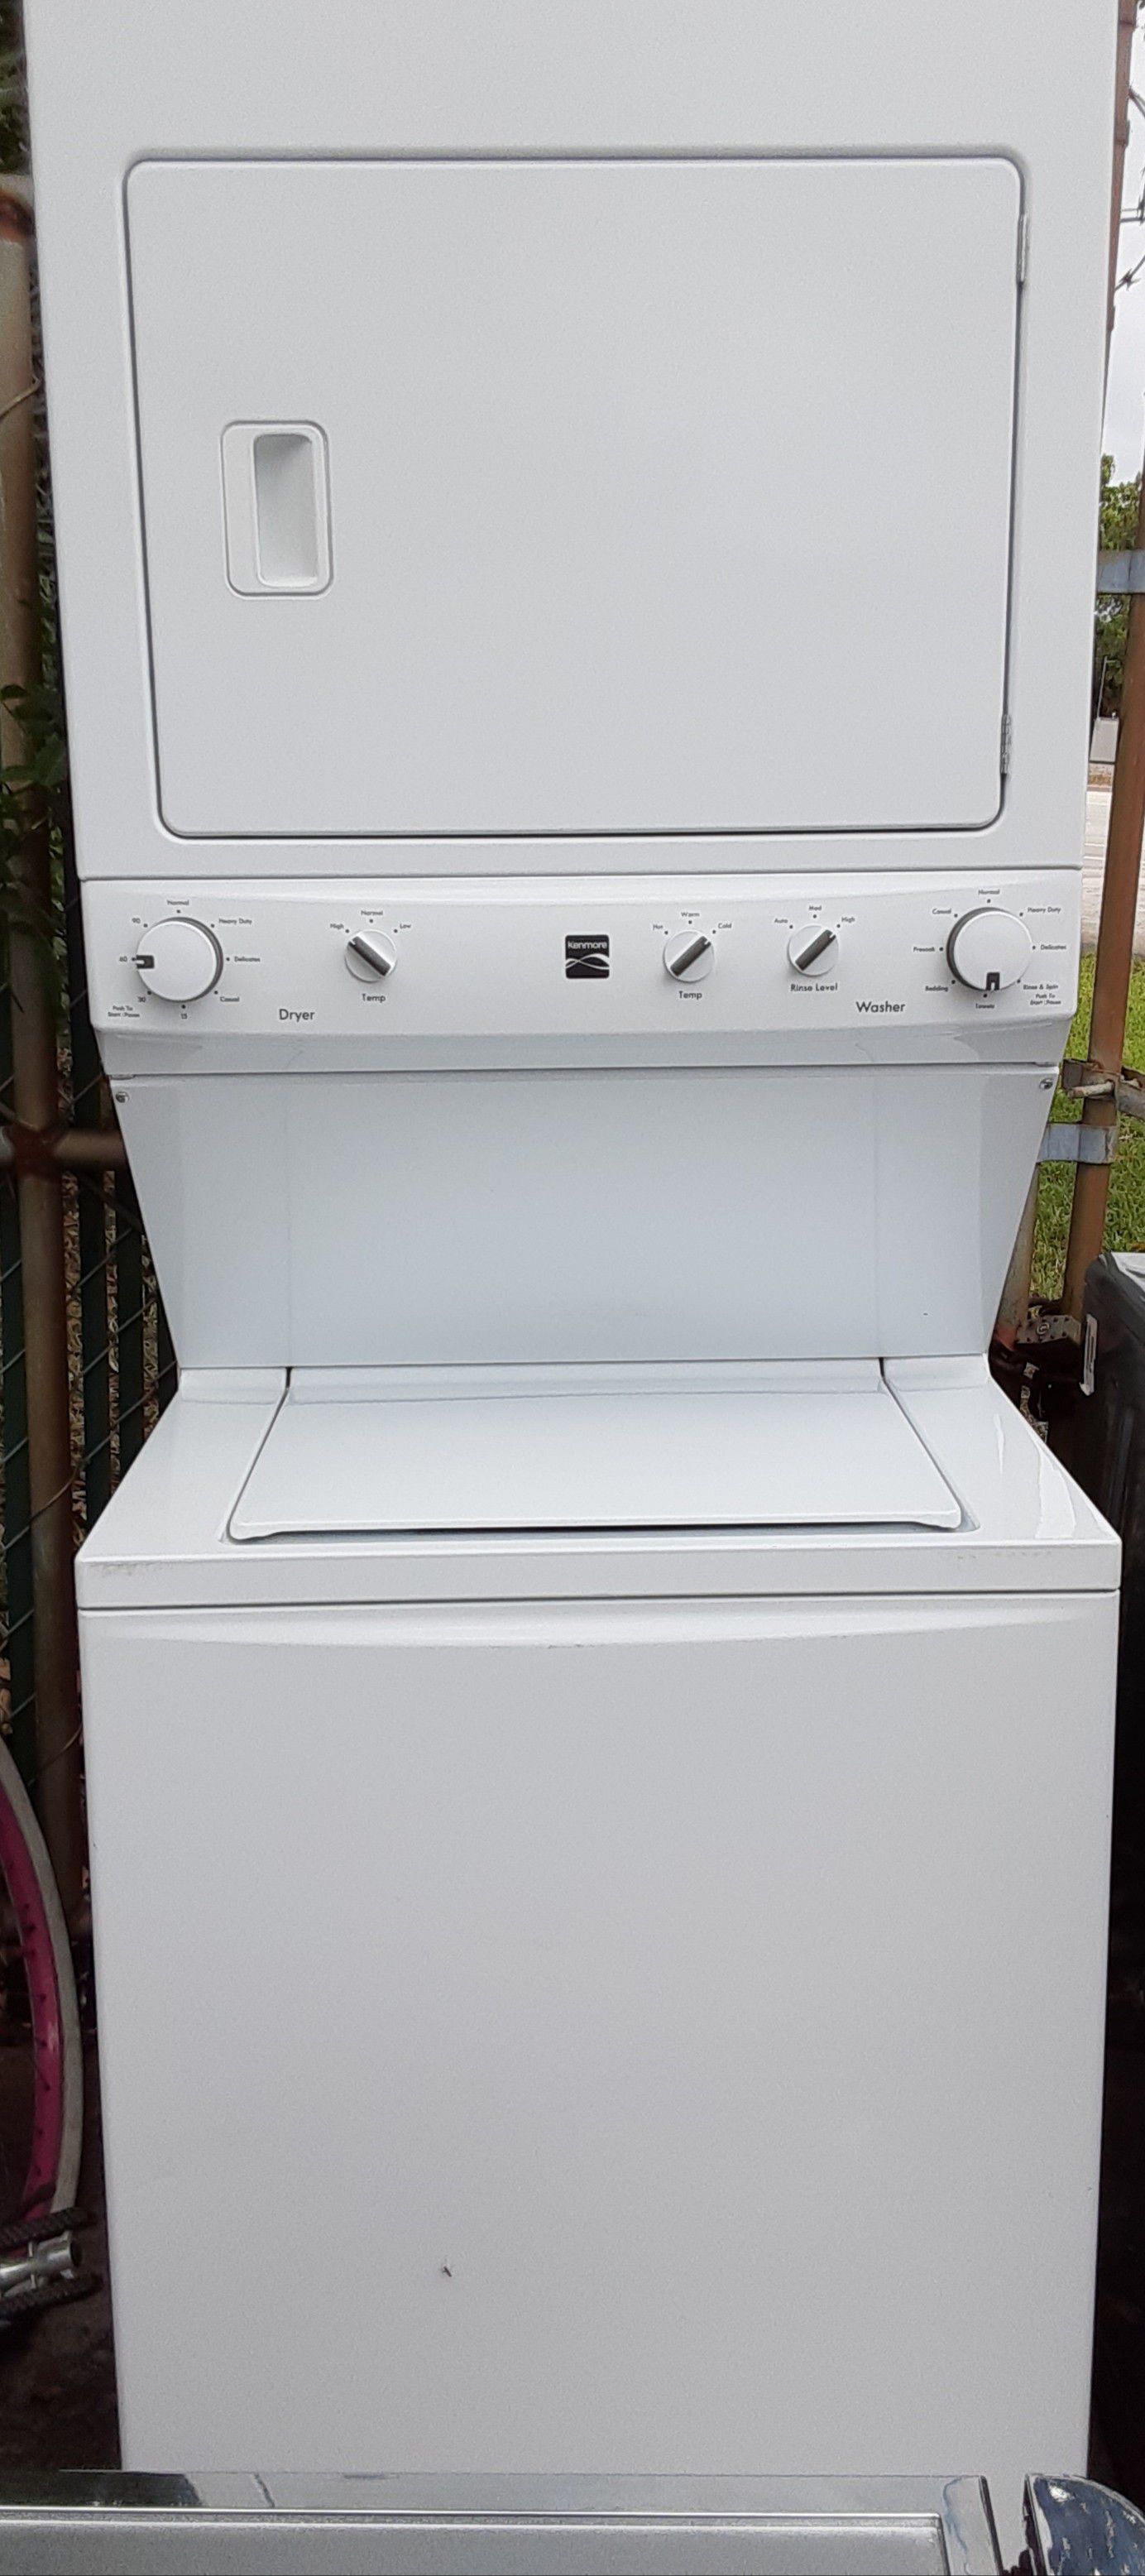 FEW MONTH OLD DOUBLE SUPER CAPACITY STACKABLE WASHER DRYER SET WITH STAINLESS STEEL TUBS AND NO AGITATOR SELLS OVER $1,600